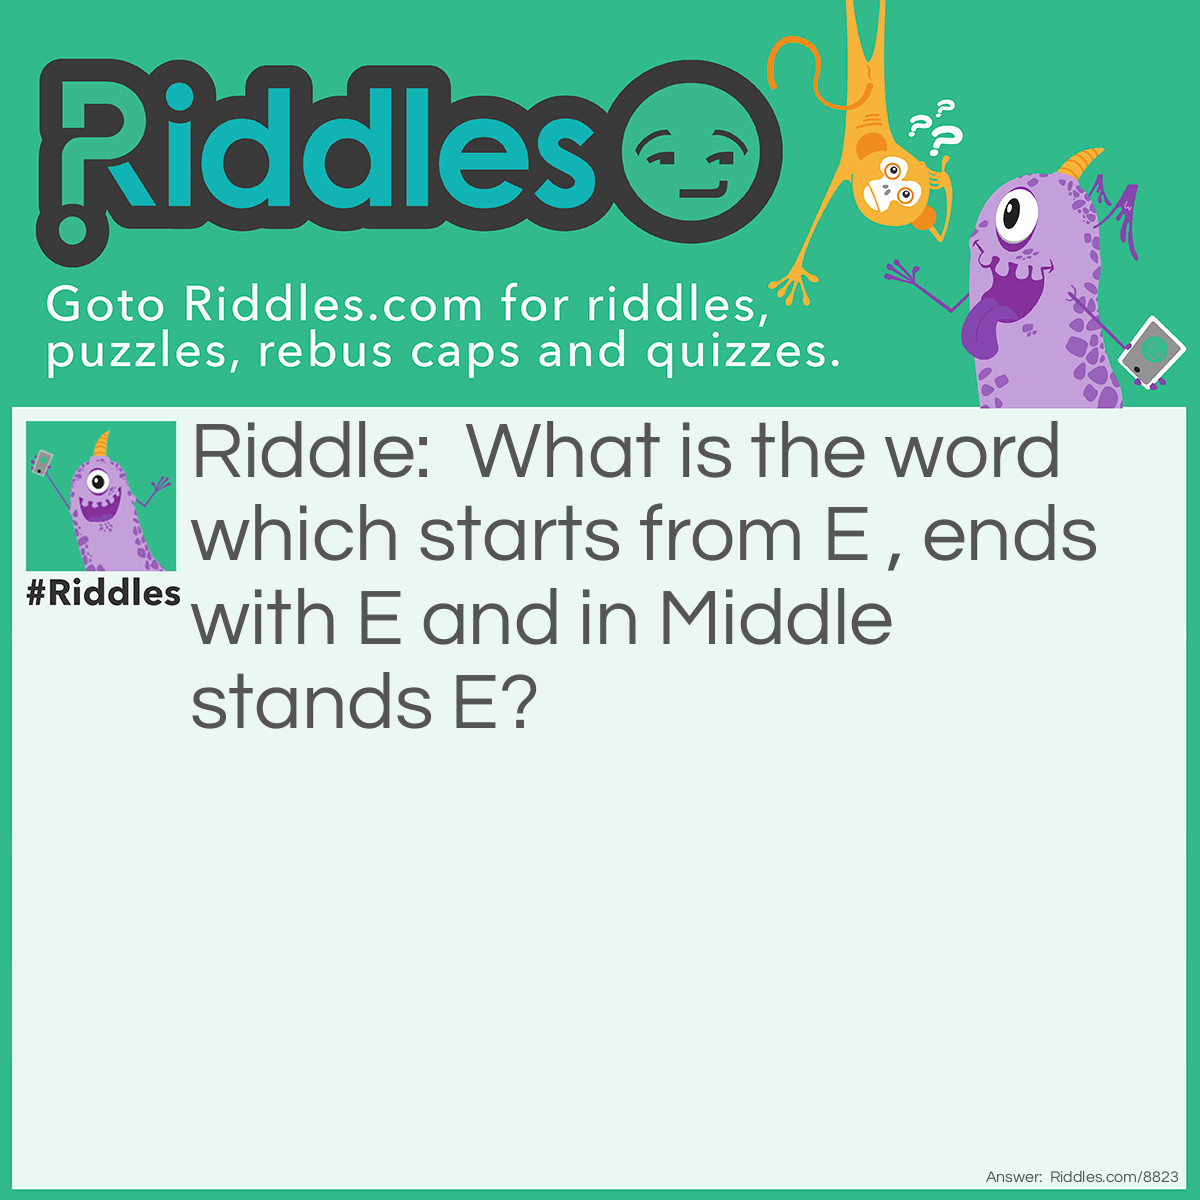 Riddle: What is the word which starts from E , ends with E and in Middle stands E? Answer: Envelope.